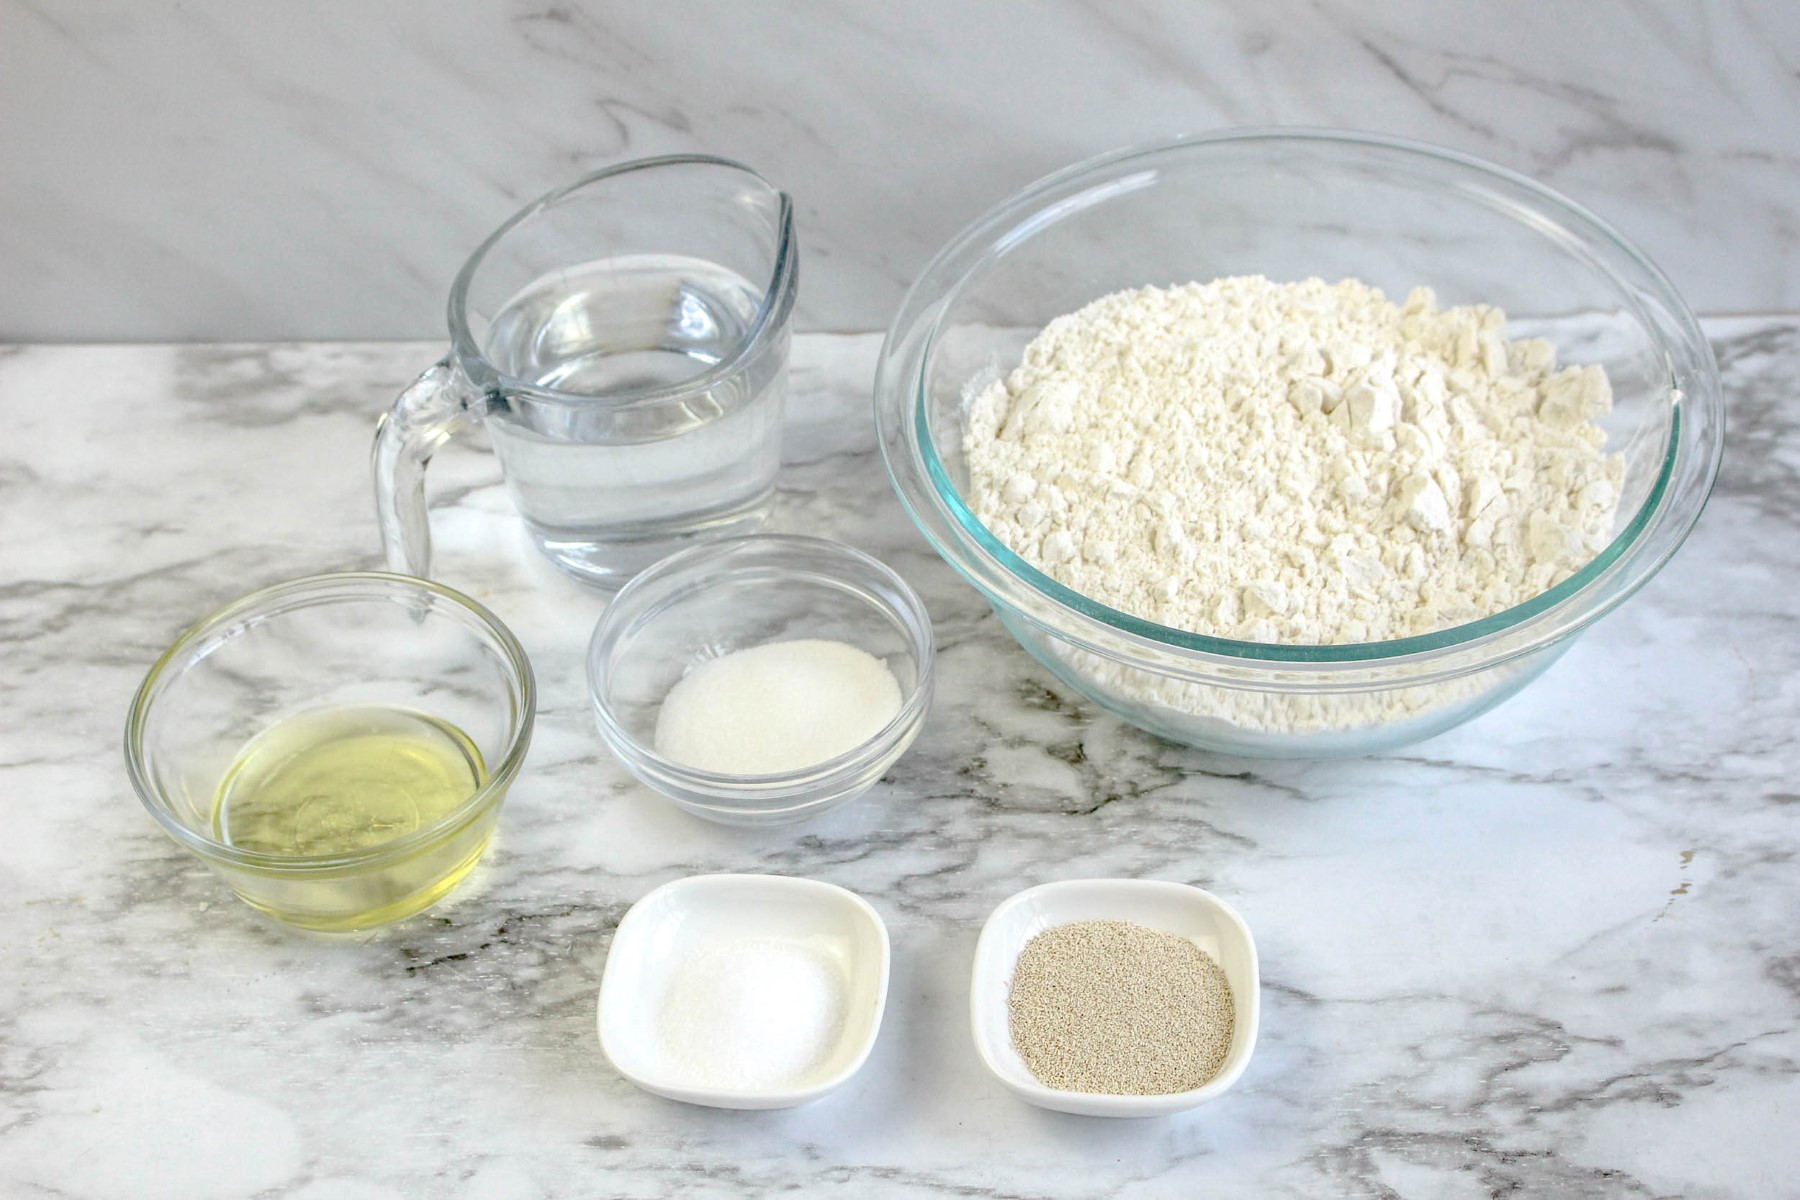 All the ingredients to make bread machine pizza dough in glass bowls on a marble counter.